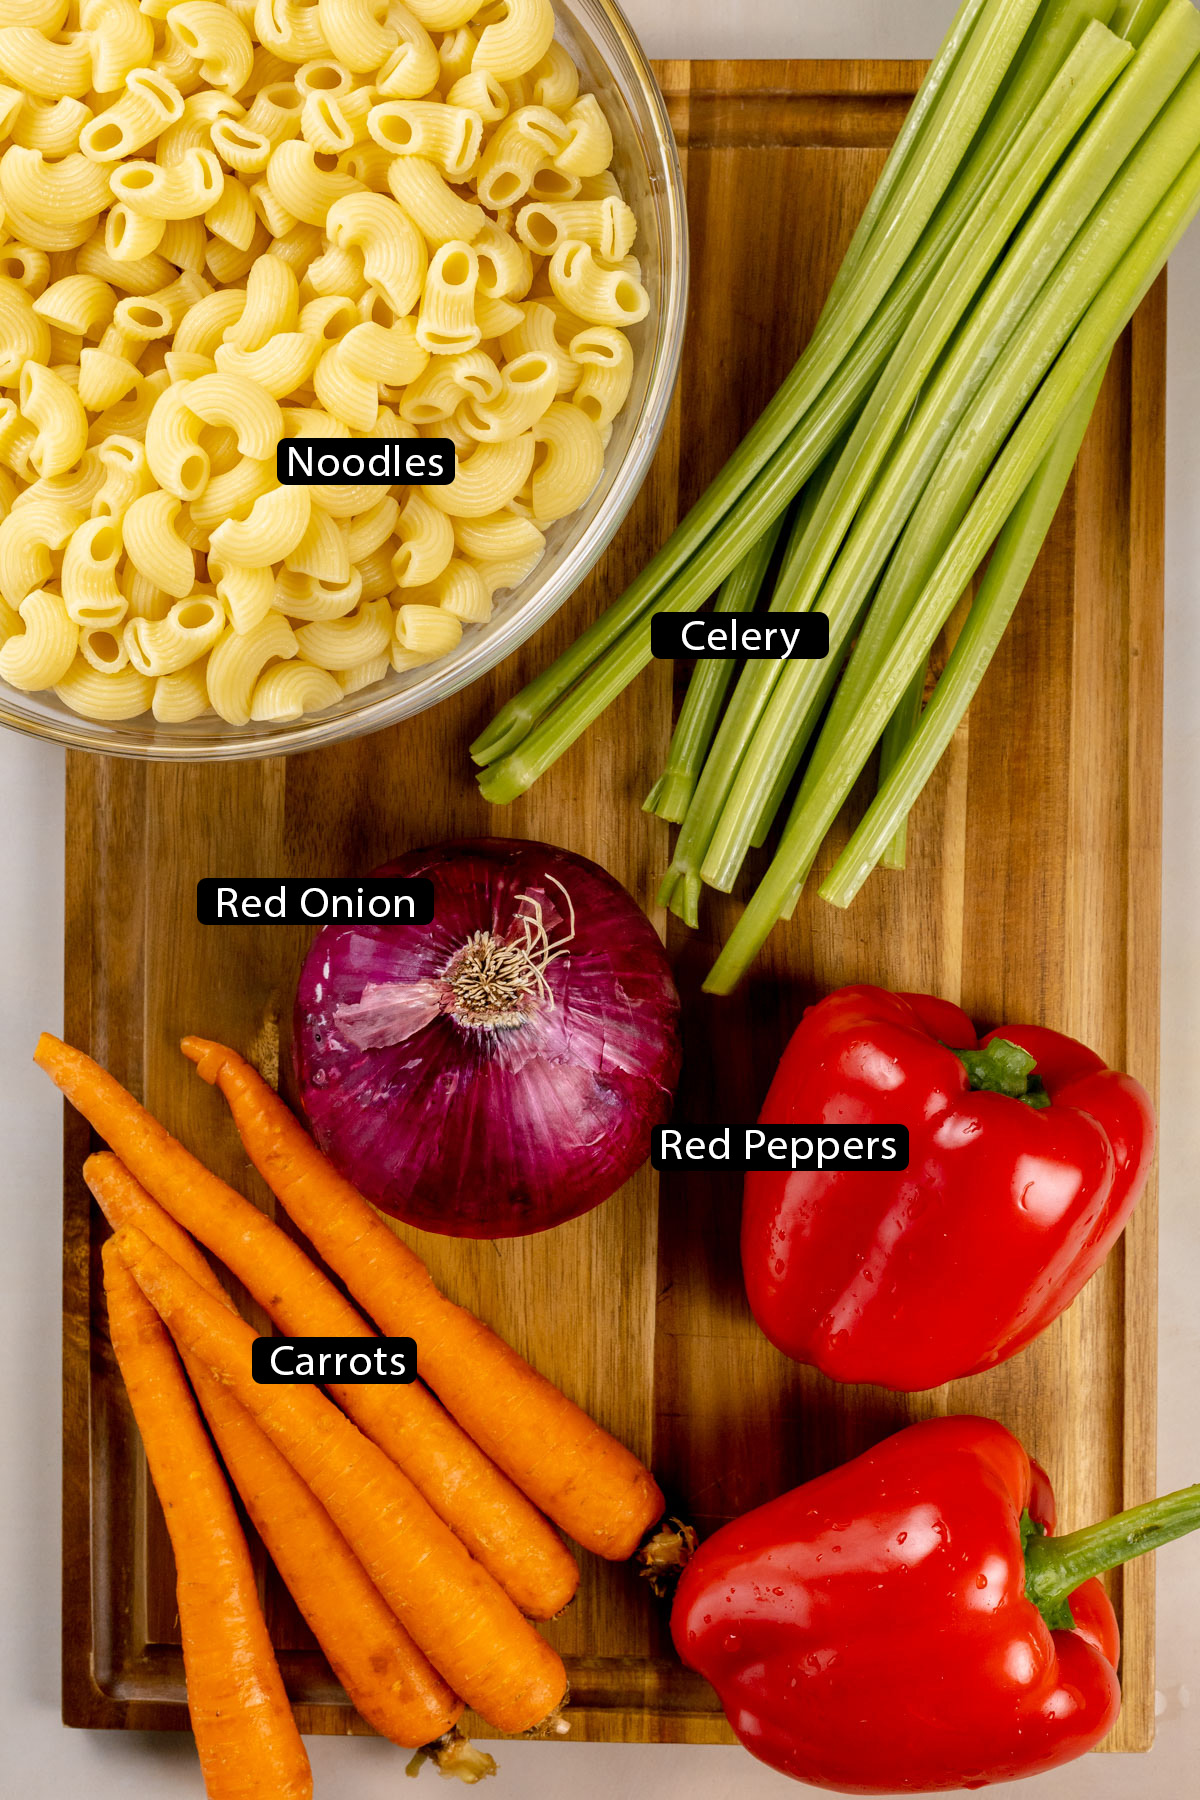 Ingredients for the vegan macaroni salad on a wood cutting board. Black and white labels have been added to name each ingredient like noodles and red peppers.